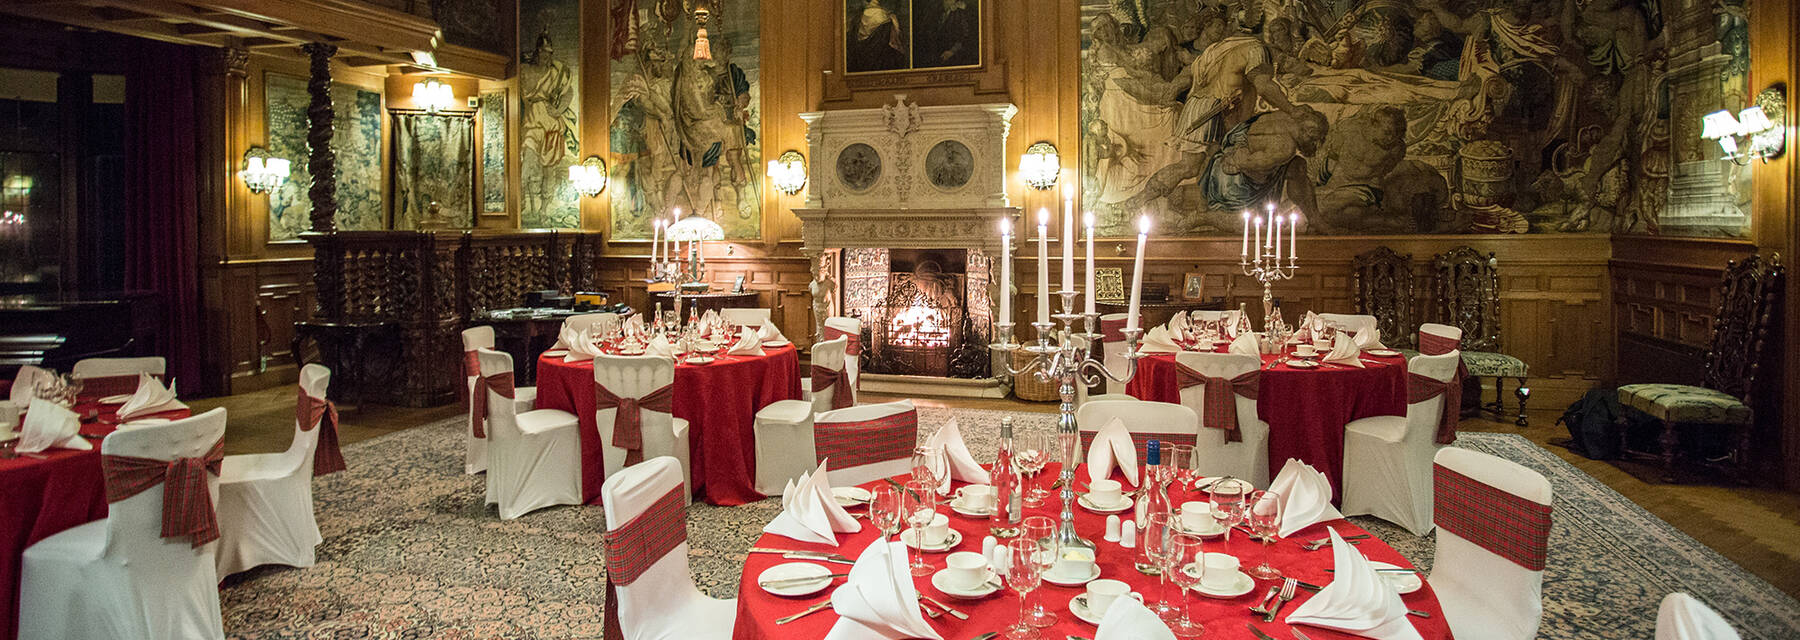 Interior of Fyvie Castle with tables laid for an occasion